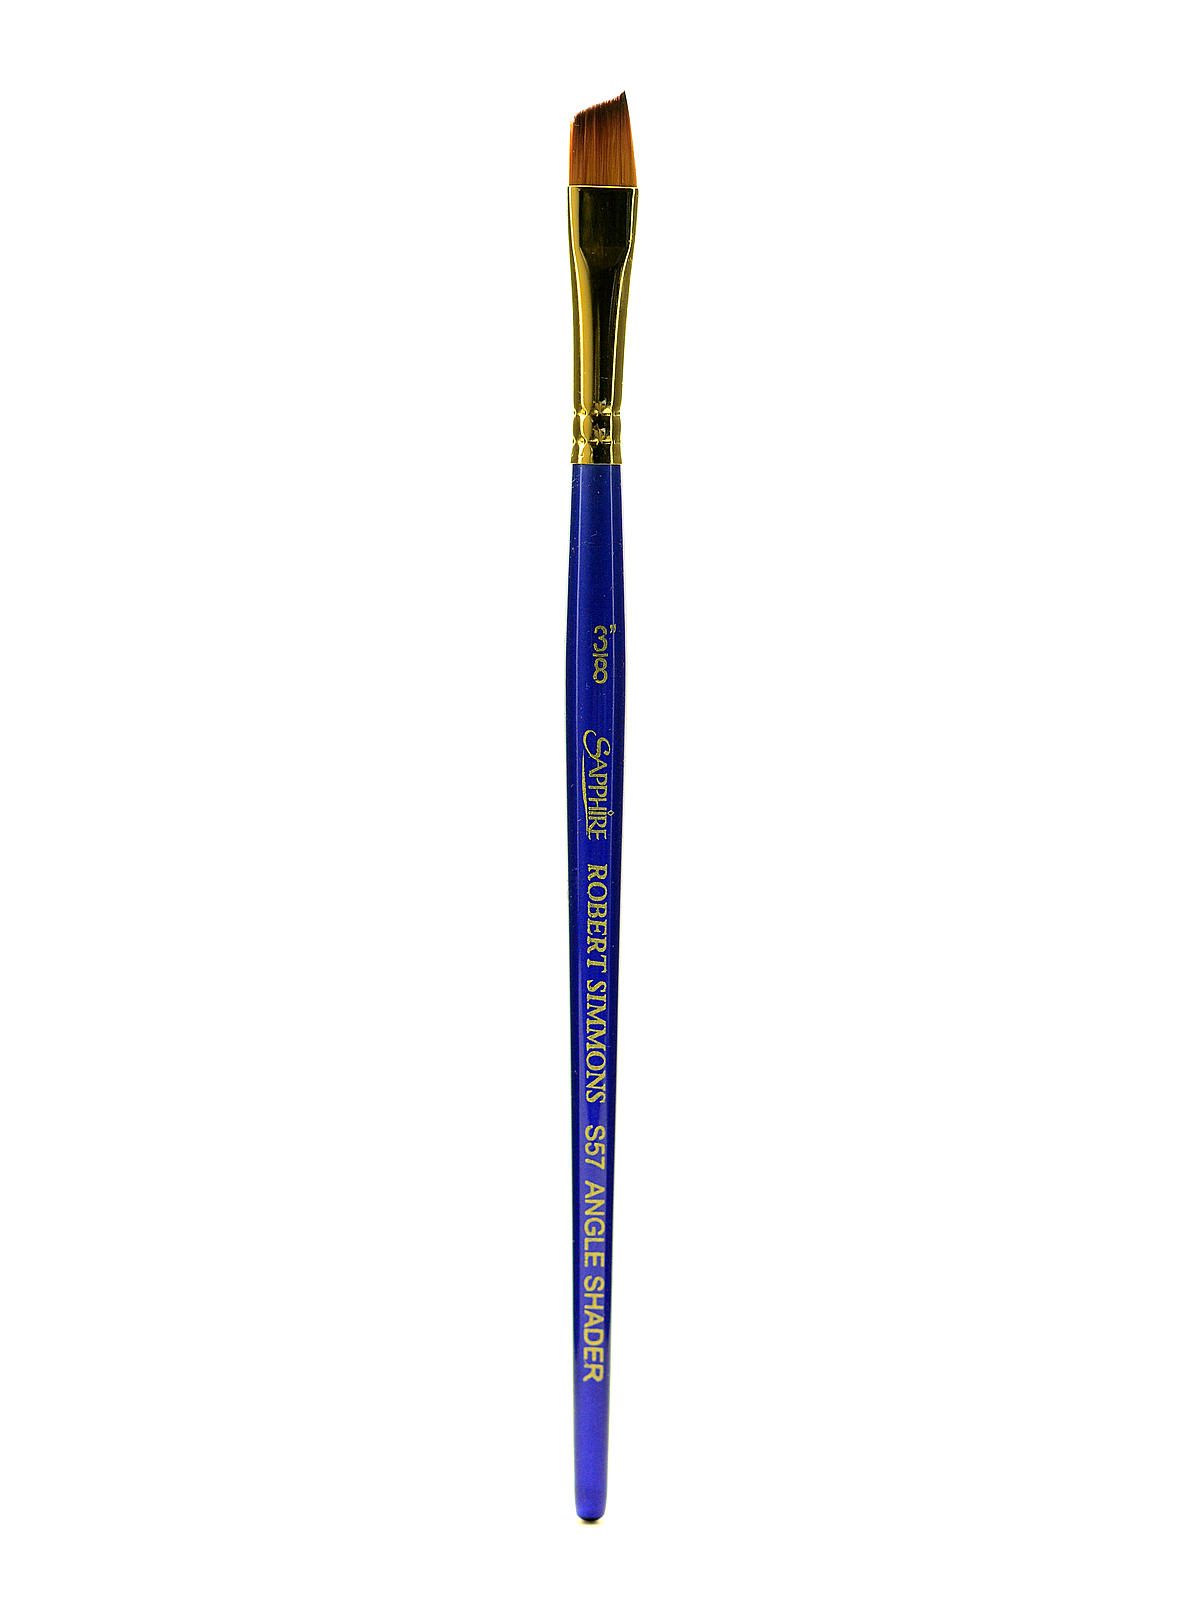 Sapphire Series Synthetic Brushes Short Handle 3 8 In. Angle Shader S57